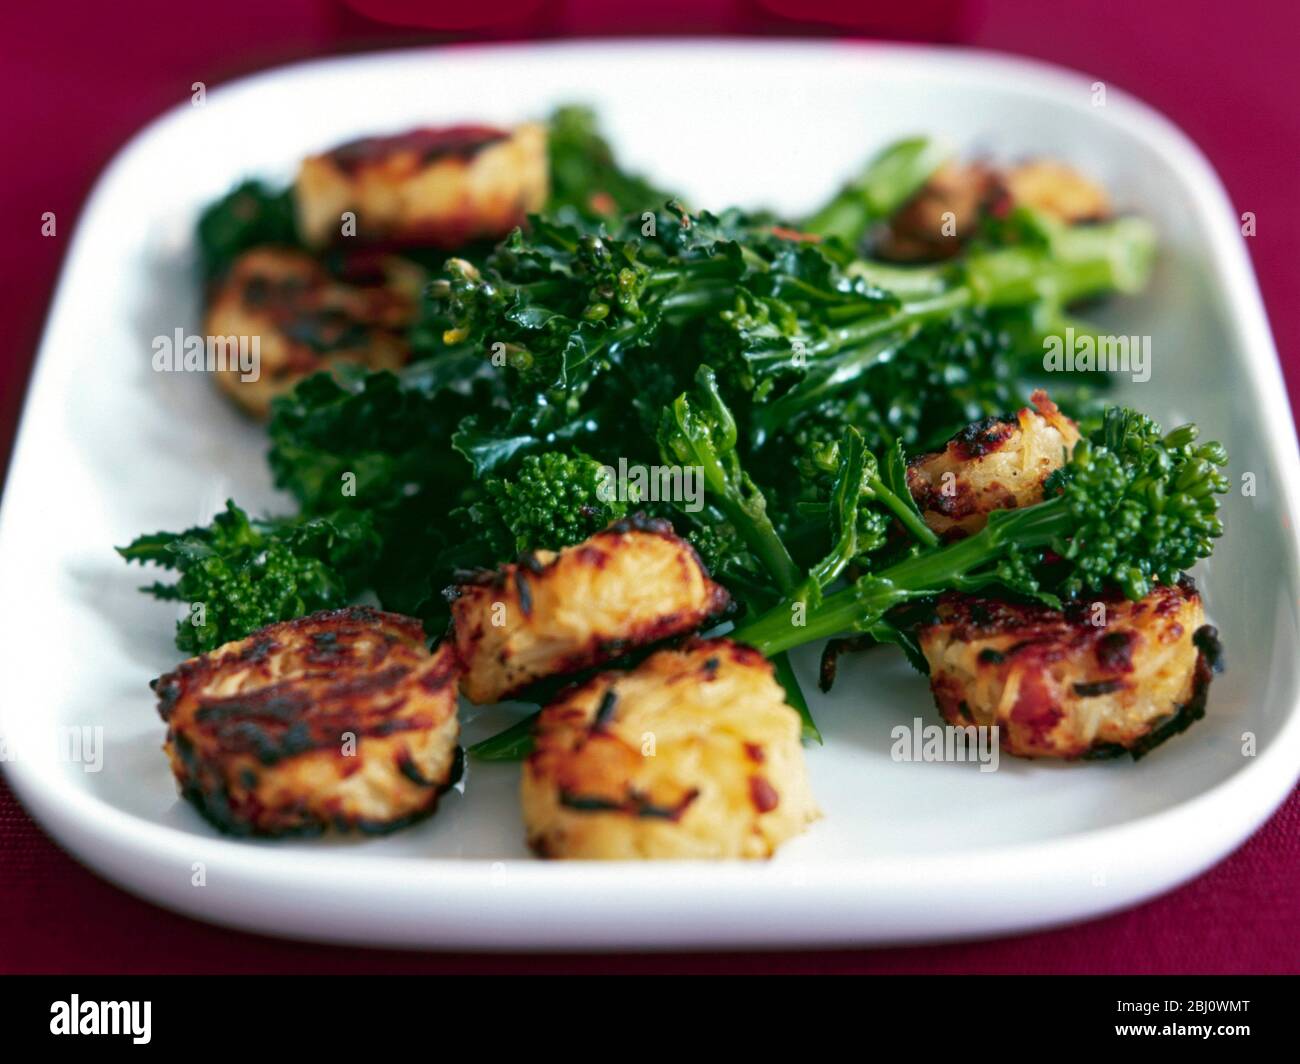 Vegetable dish of sprouting broccoli spears served with rosti potato cakes - Stock Photo